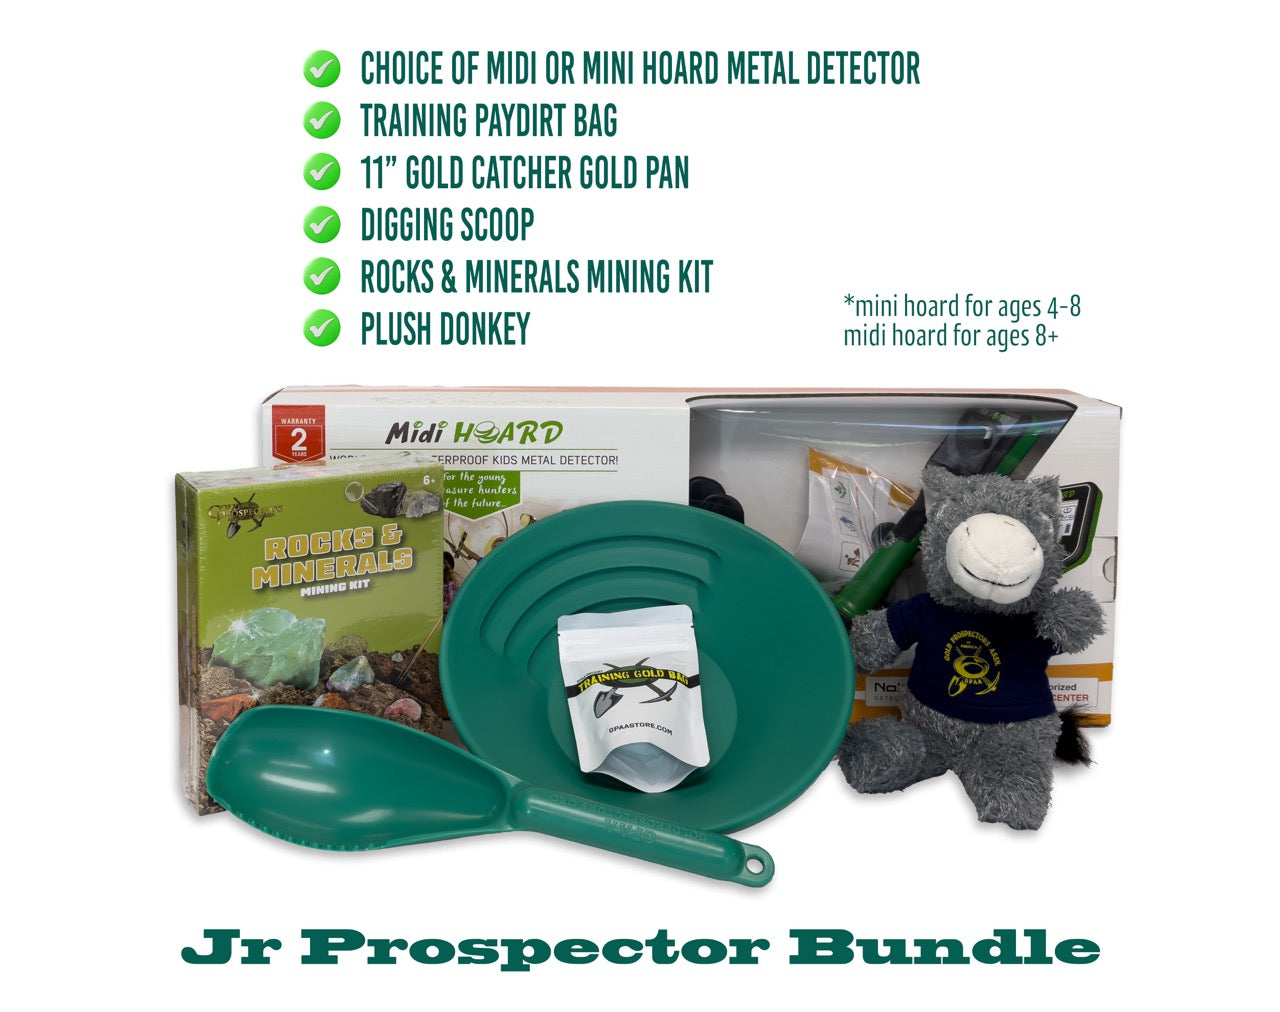 GPAA's Lucky Nugget Paydirt Subscription – Gold Prospectors Association of  America